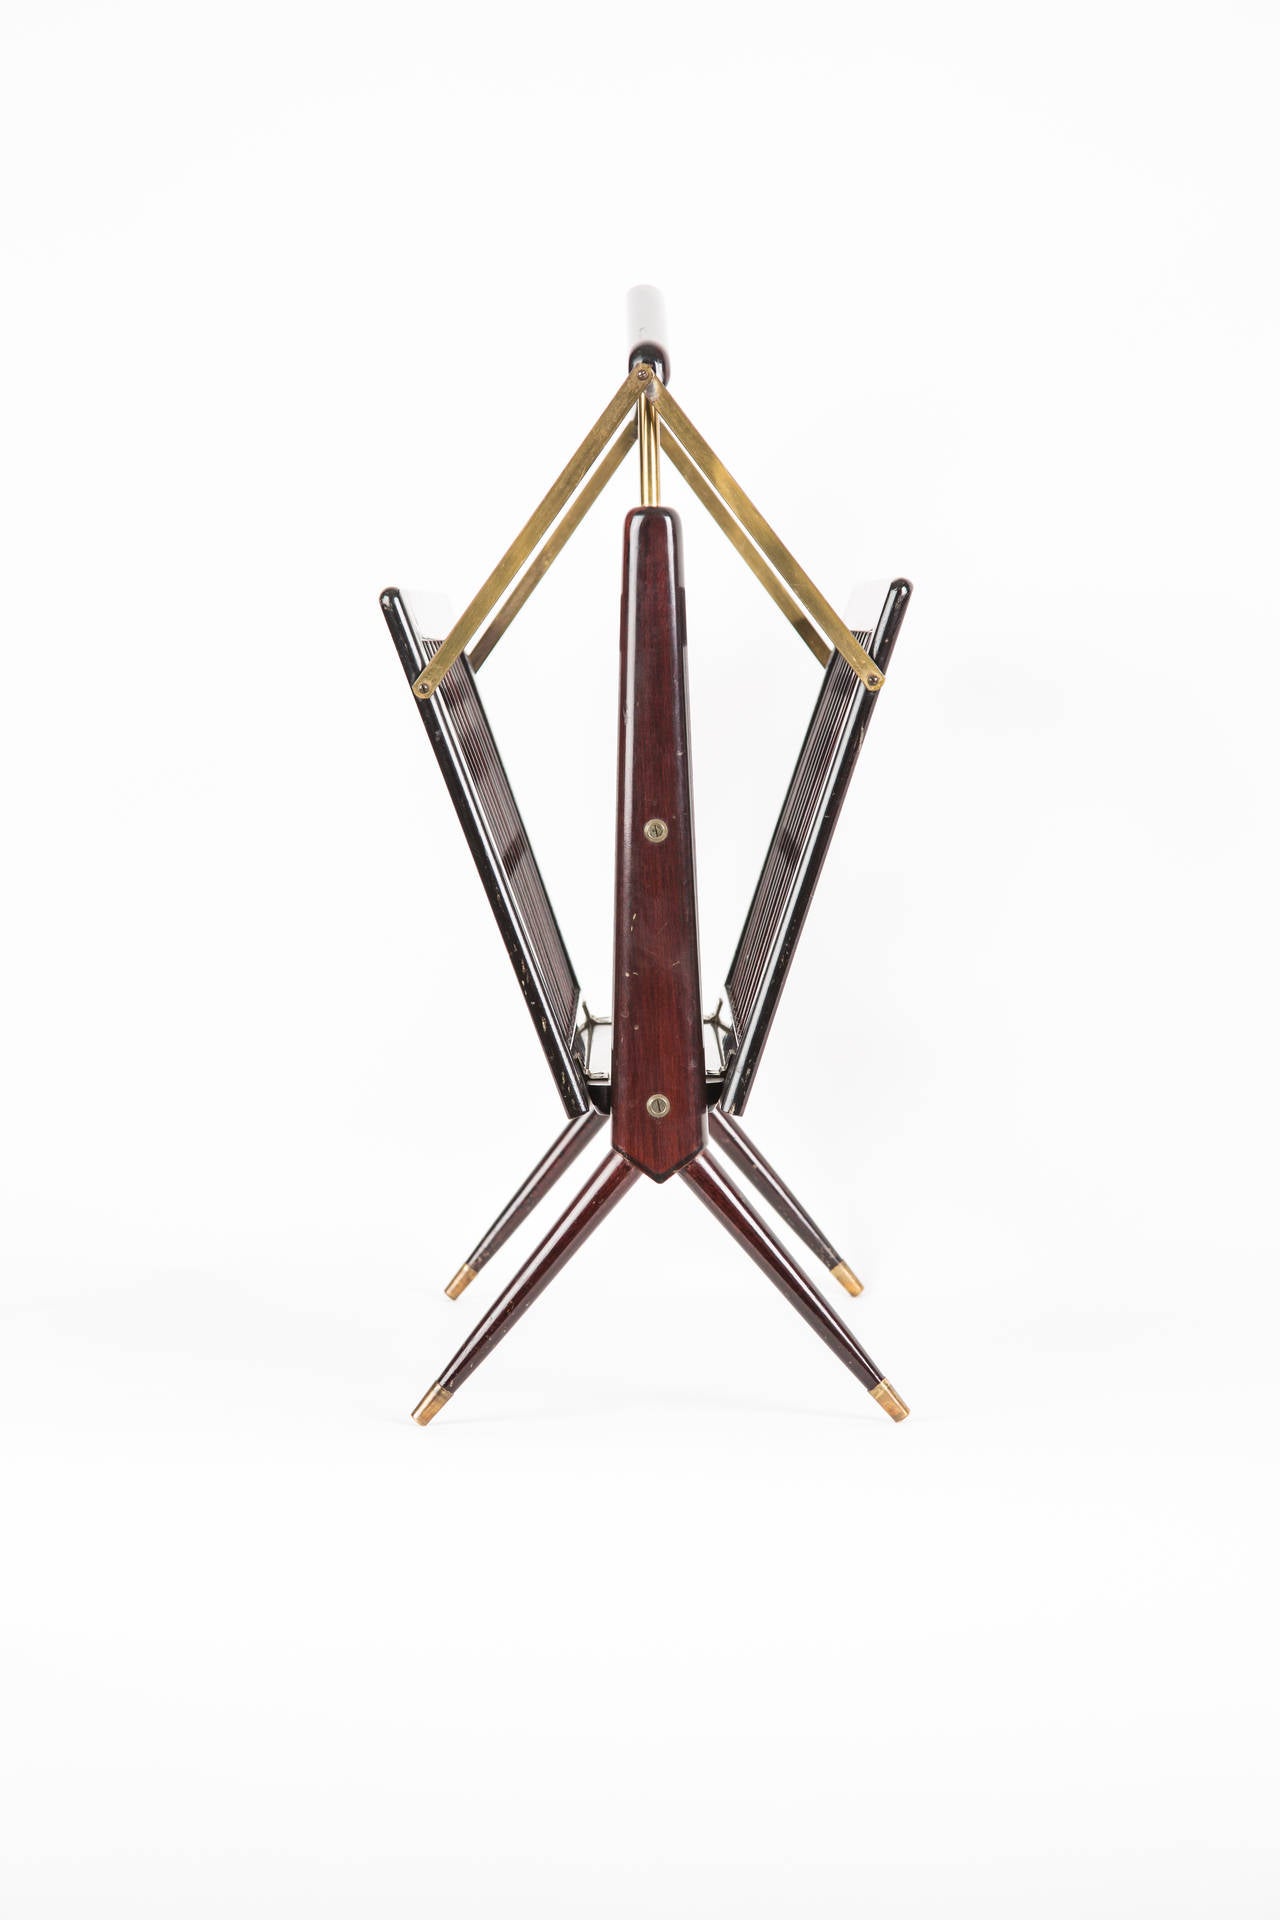 20th Century Warm tropical wood Foldable Magazine Stand  in Gio Ponti Style